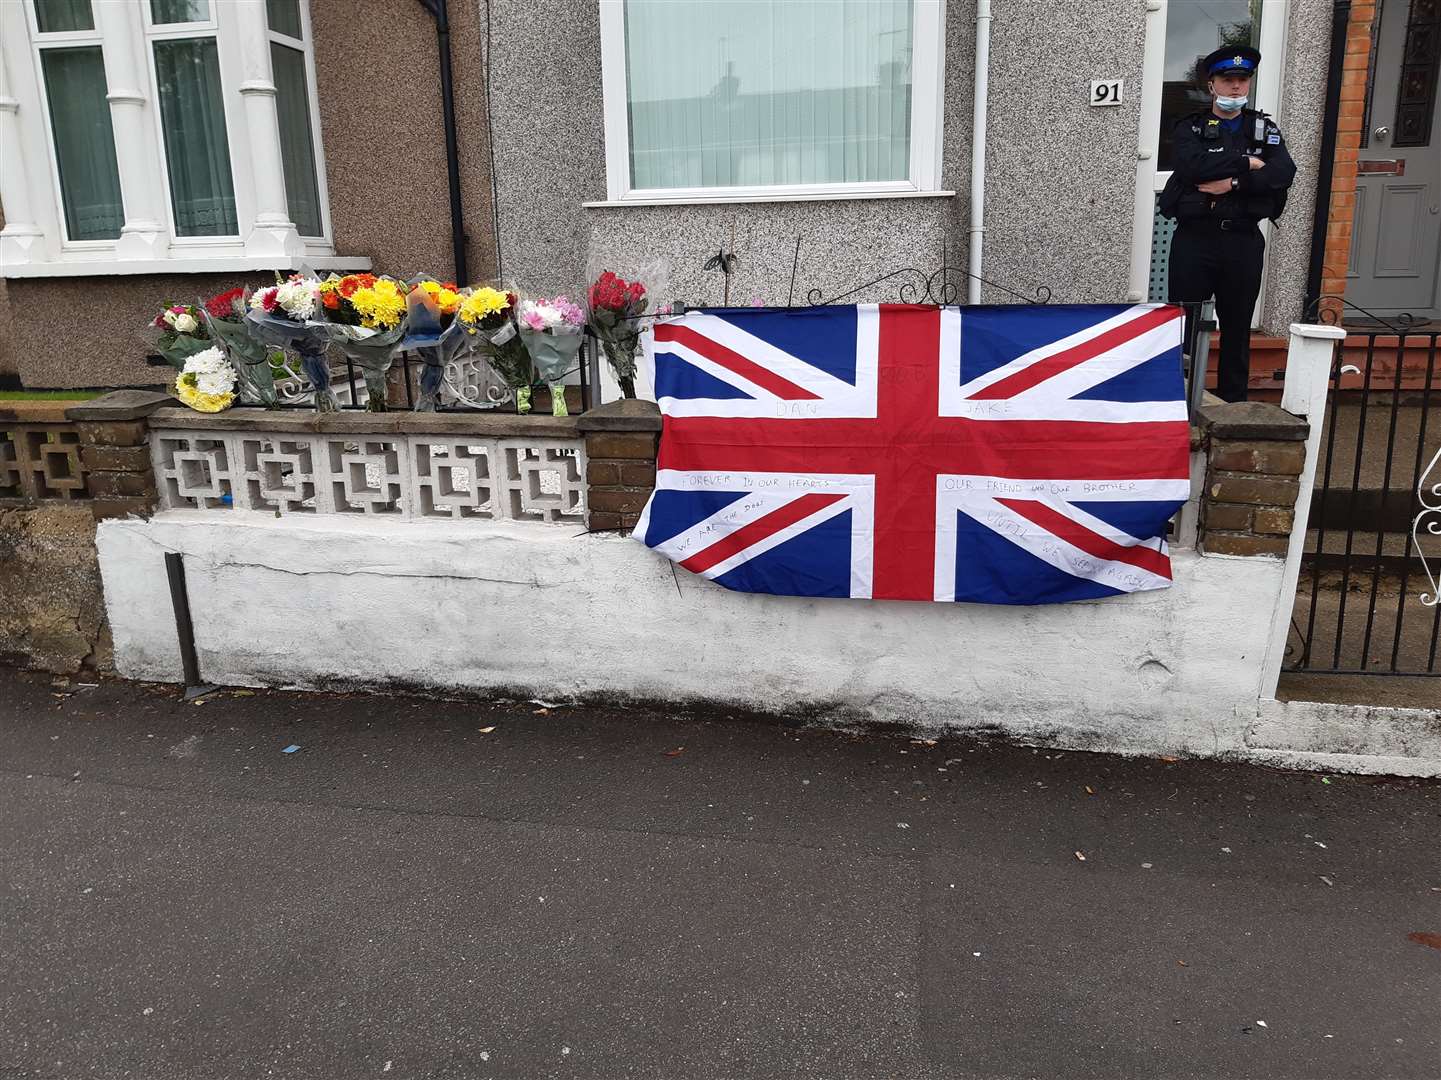 Floral tributes to Robert Williamson were left at the scene at the time